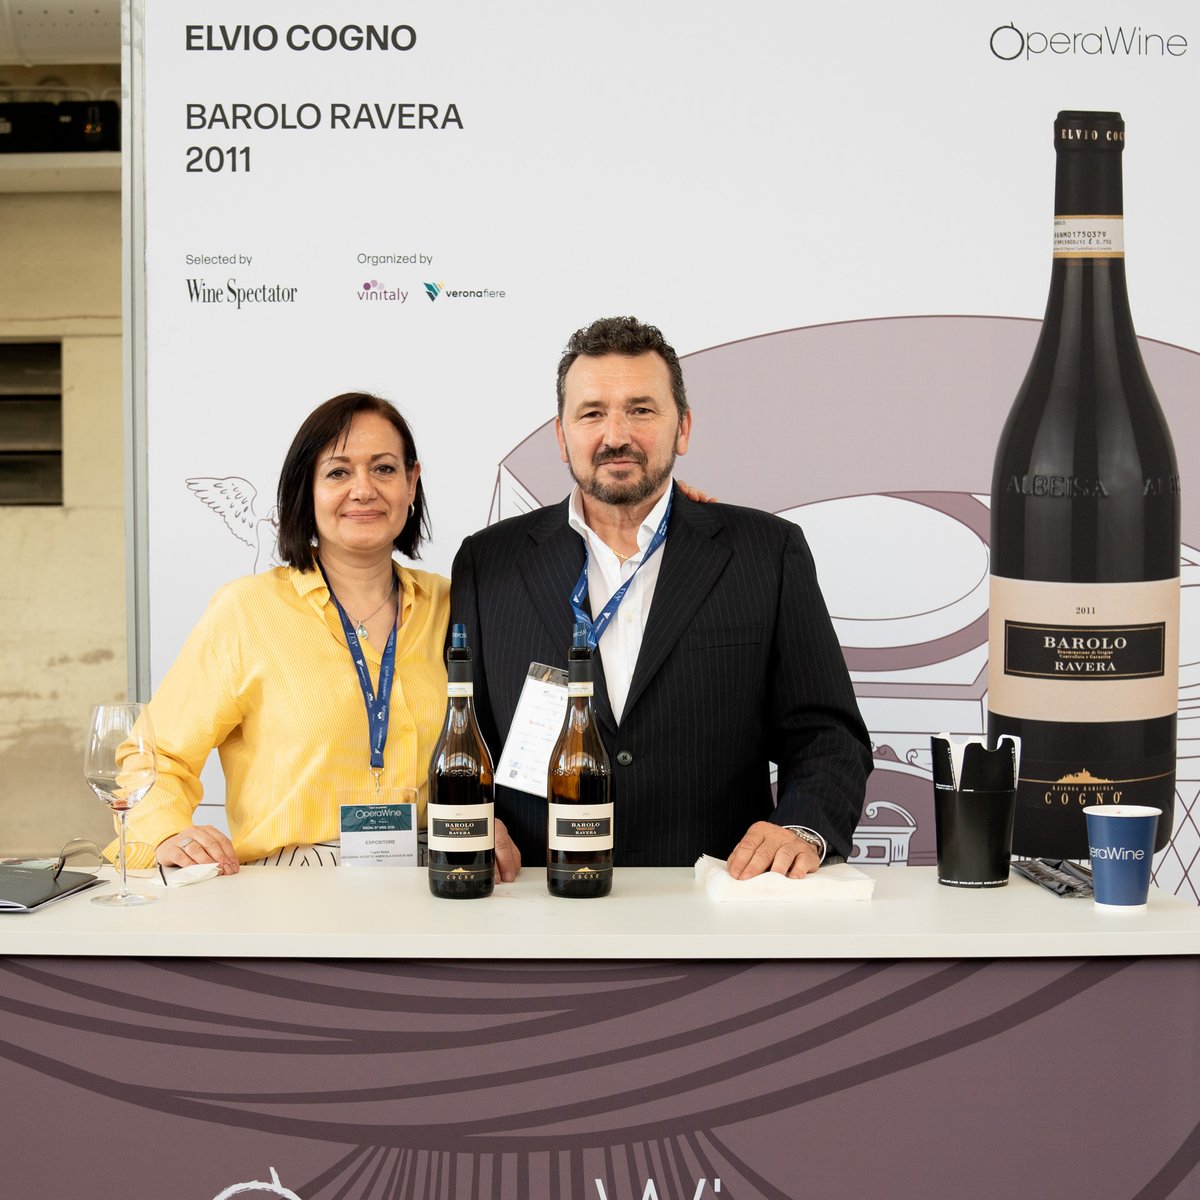 Here is the portrait of @elviocogno, one of the great Italian producers selected by Wine Spectator for #OperaWine2024. During this year's Grand Tasting, they shared with guests their Barolo Ravera 2011. Congratulations again! #OperaWine #Vinitaly2024 #finestitalianwines